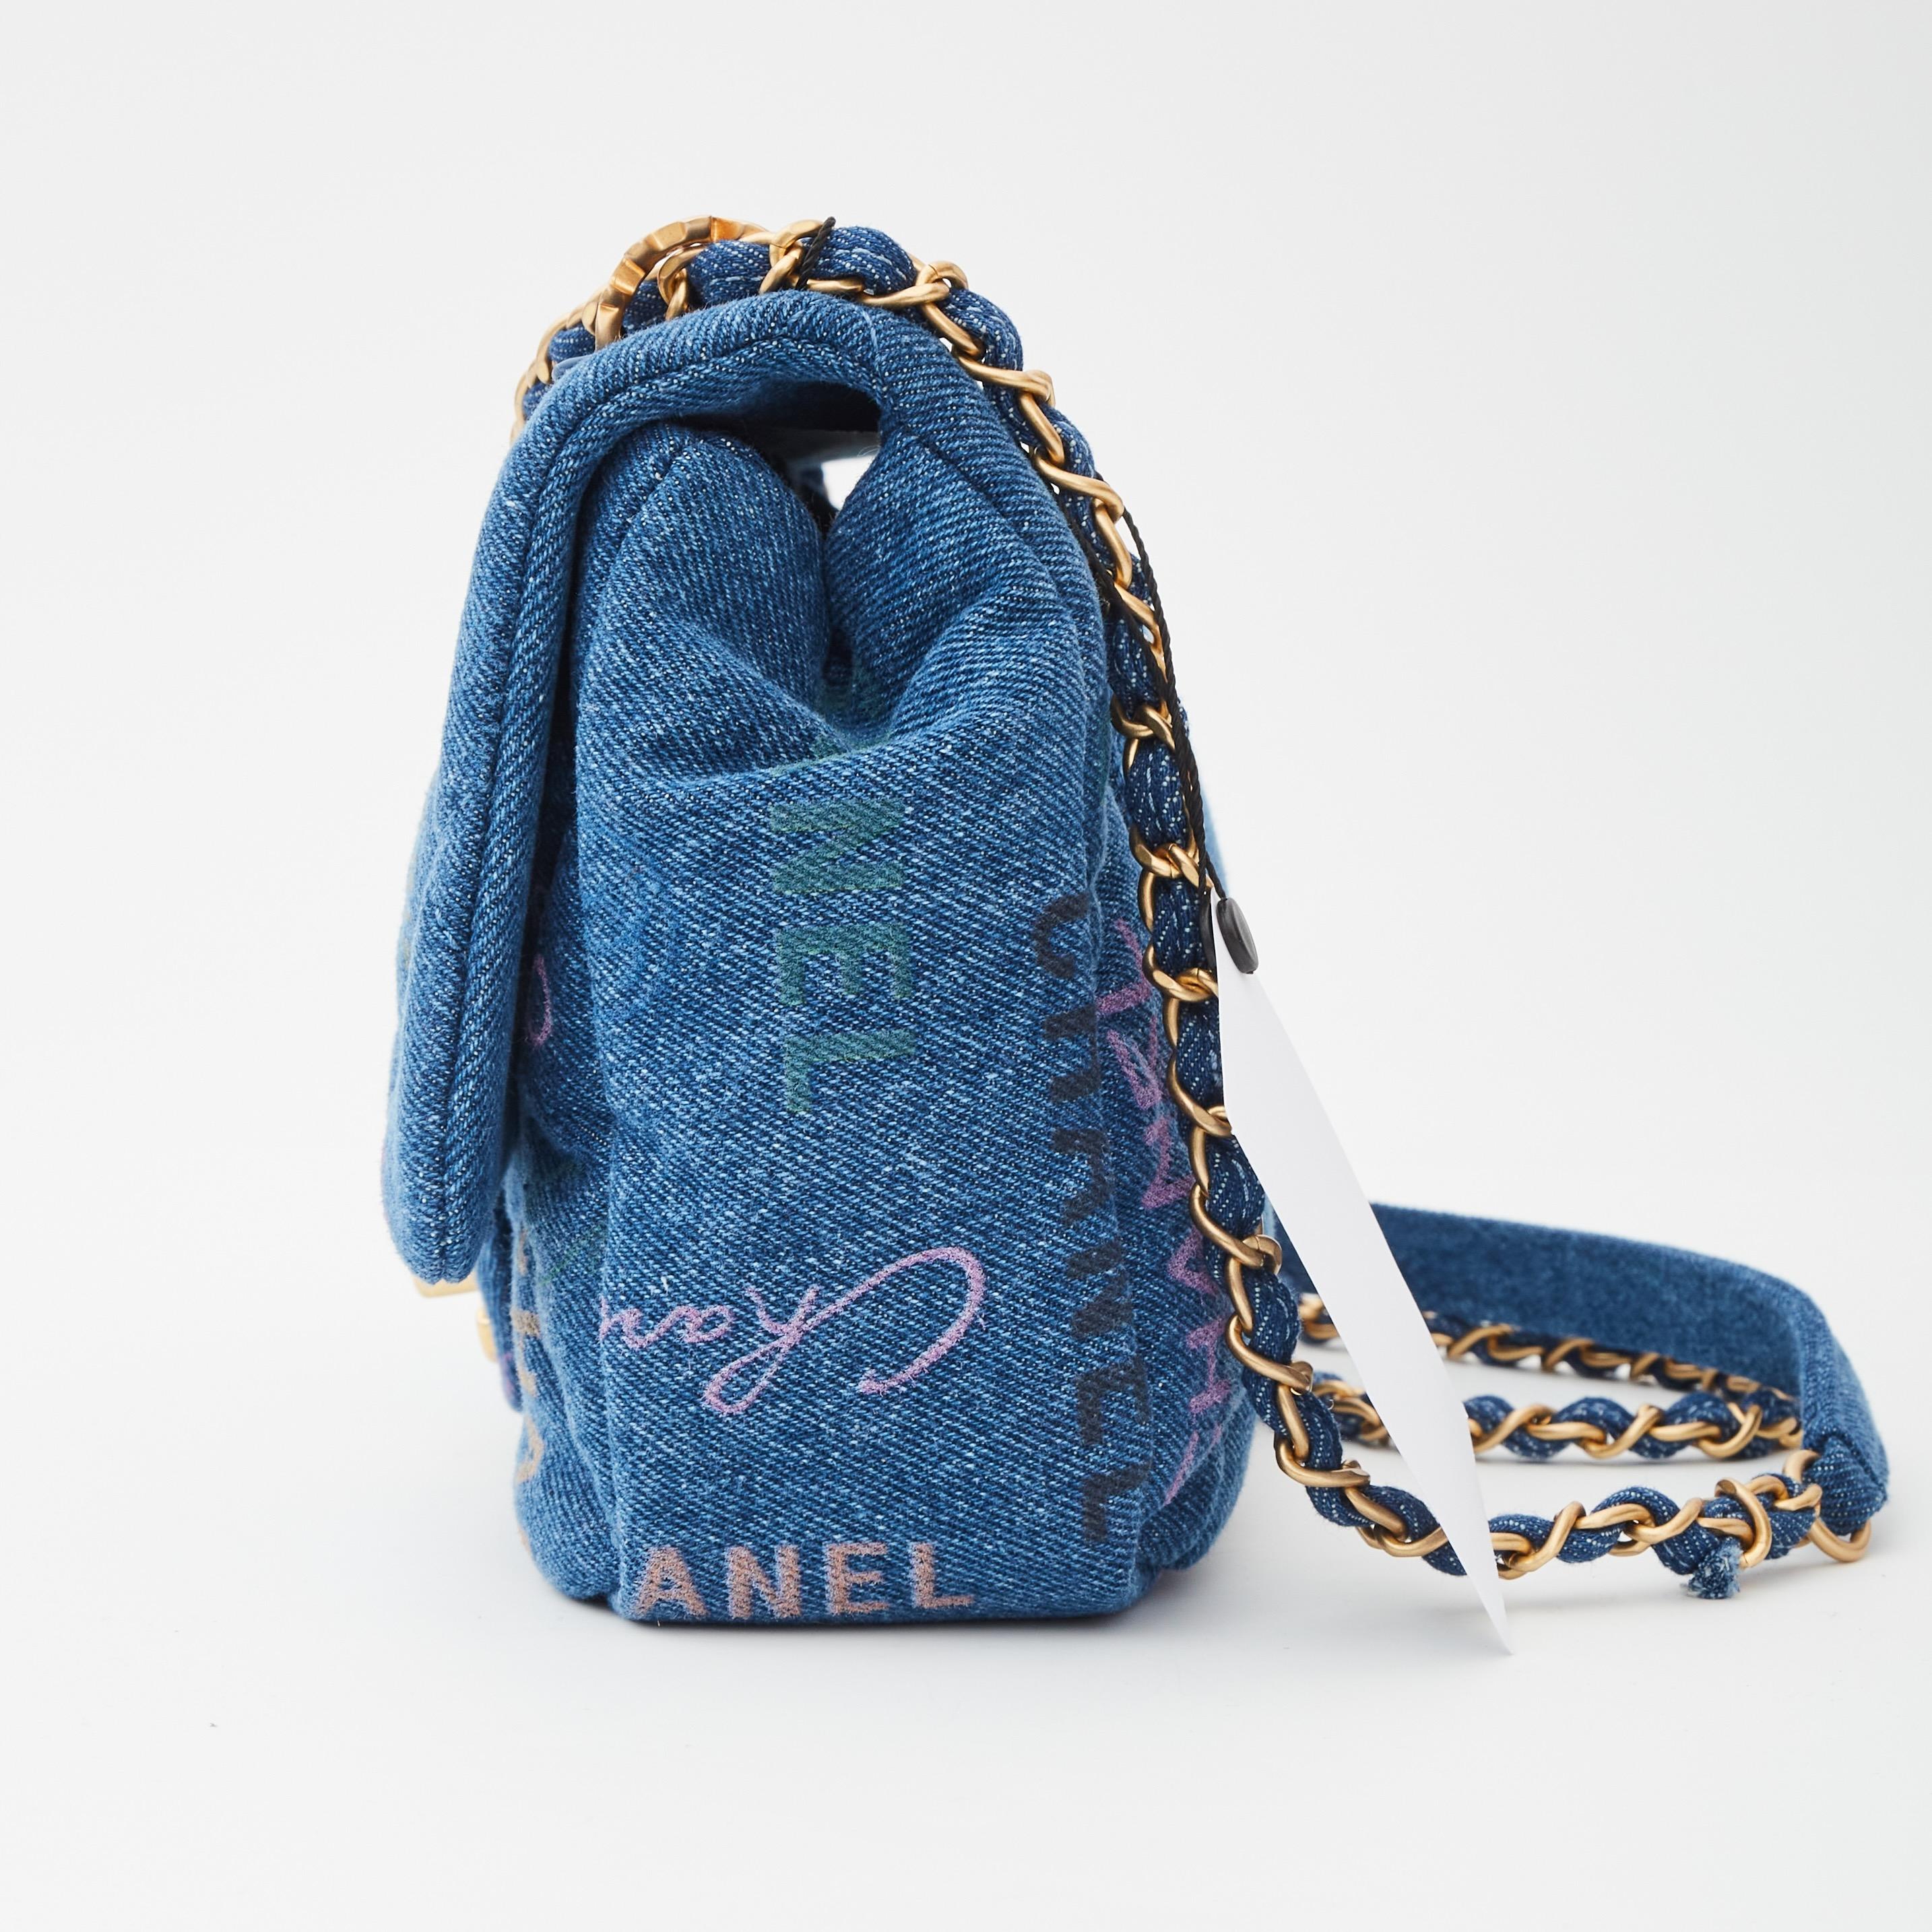 This flap bag is made from blue denim. The bag features a crossbody canvas threaded aged gold chain shoulder strap. It also features a graffiti CC motif, and an aged gold Chanel CC turn lock that opens the flap to a matching fabric interior with a